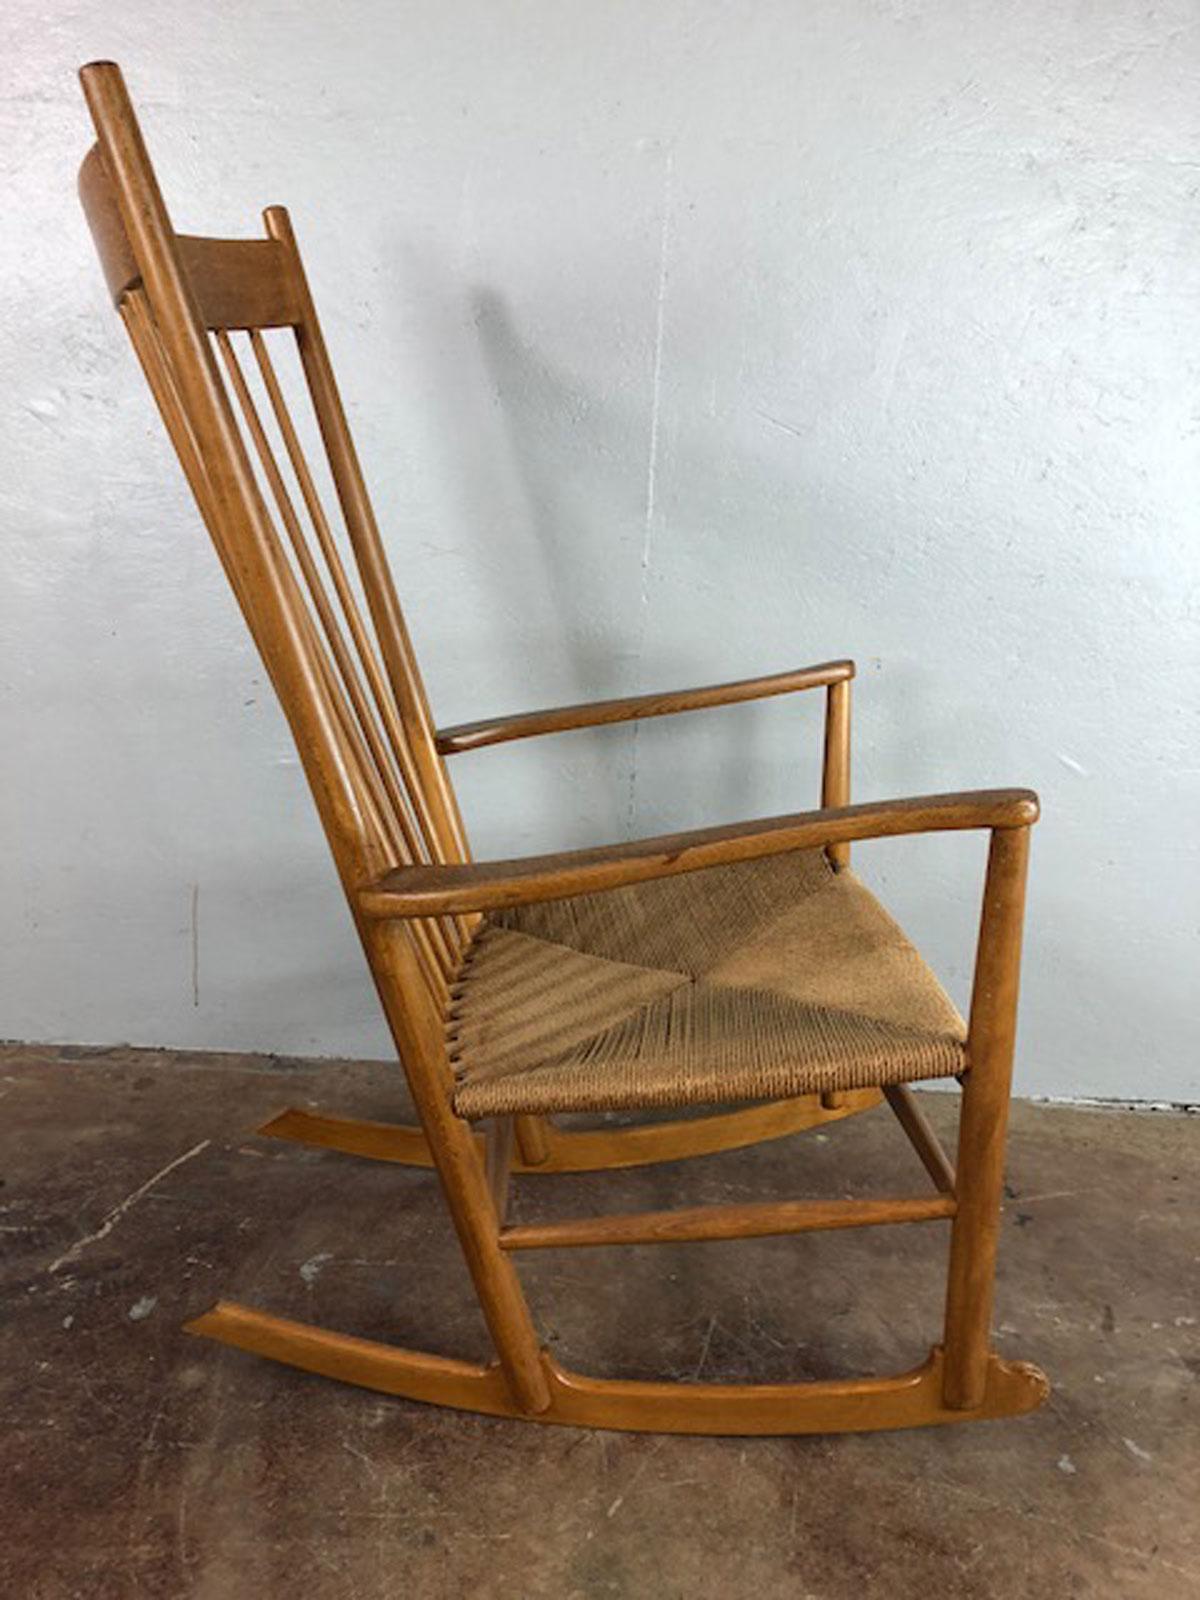 Stylish and iconic Hans Wegner rocking chair in beech with rope seating weave, circa 1940s.